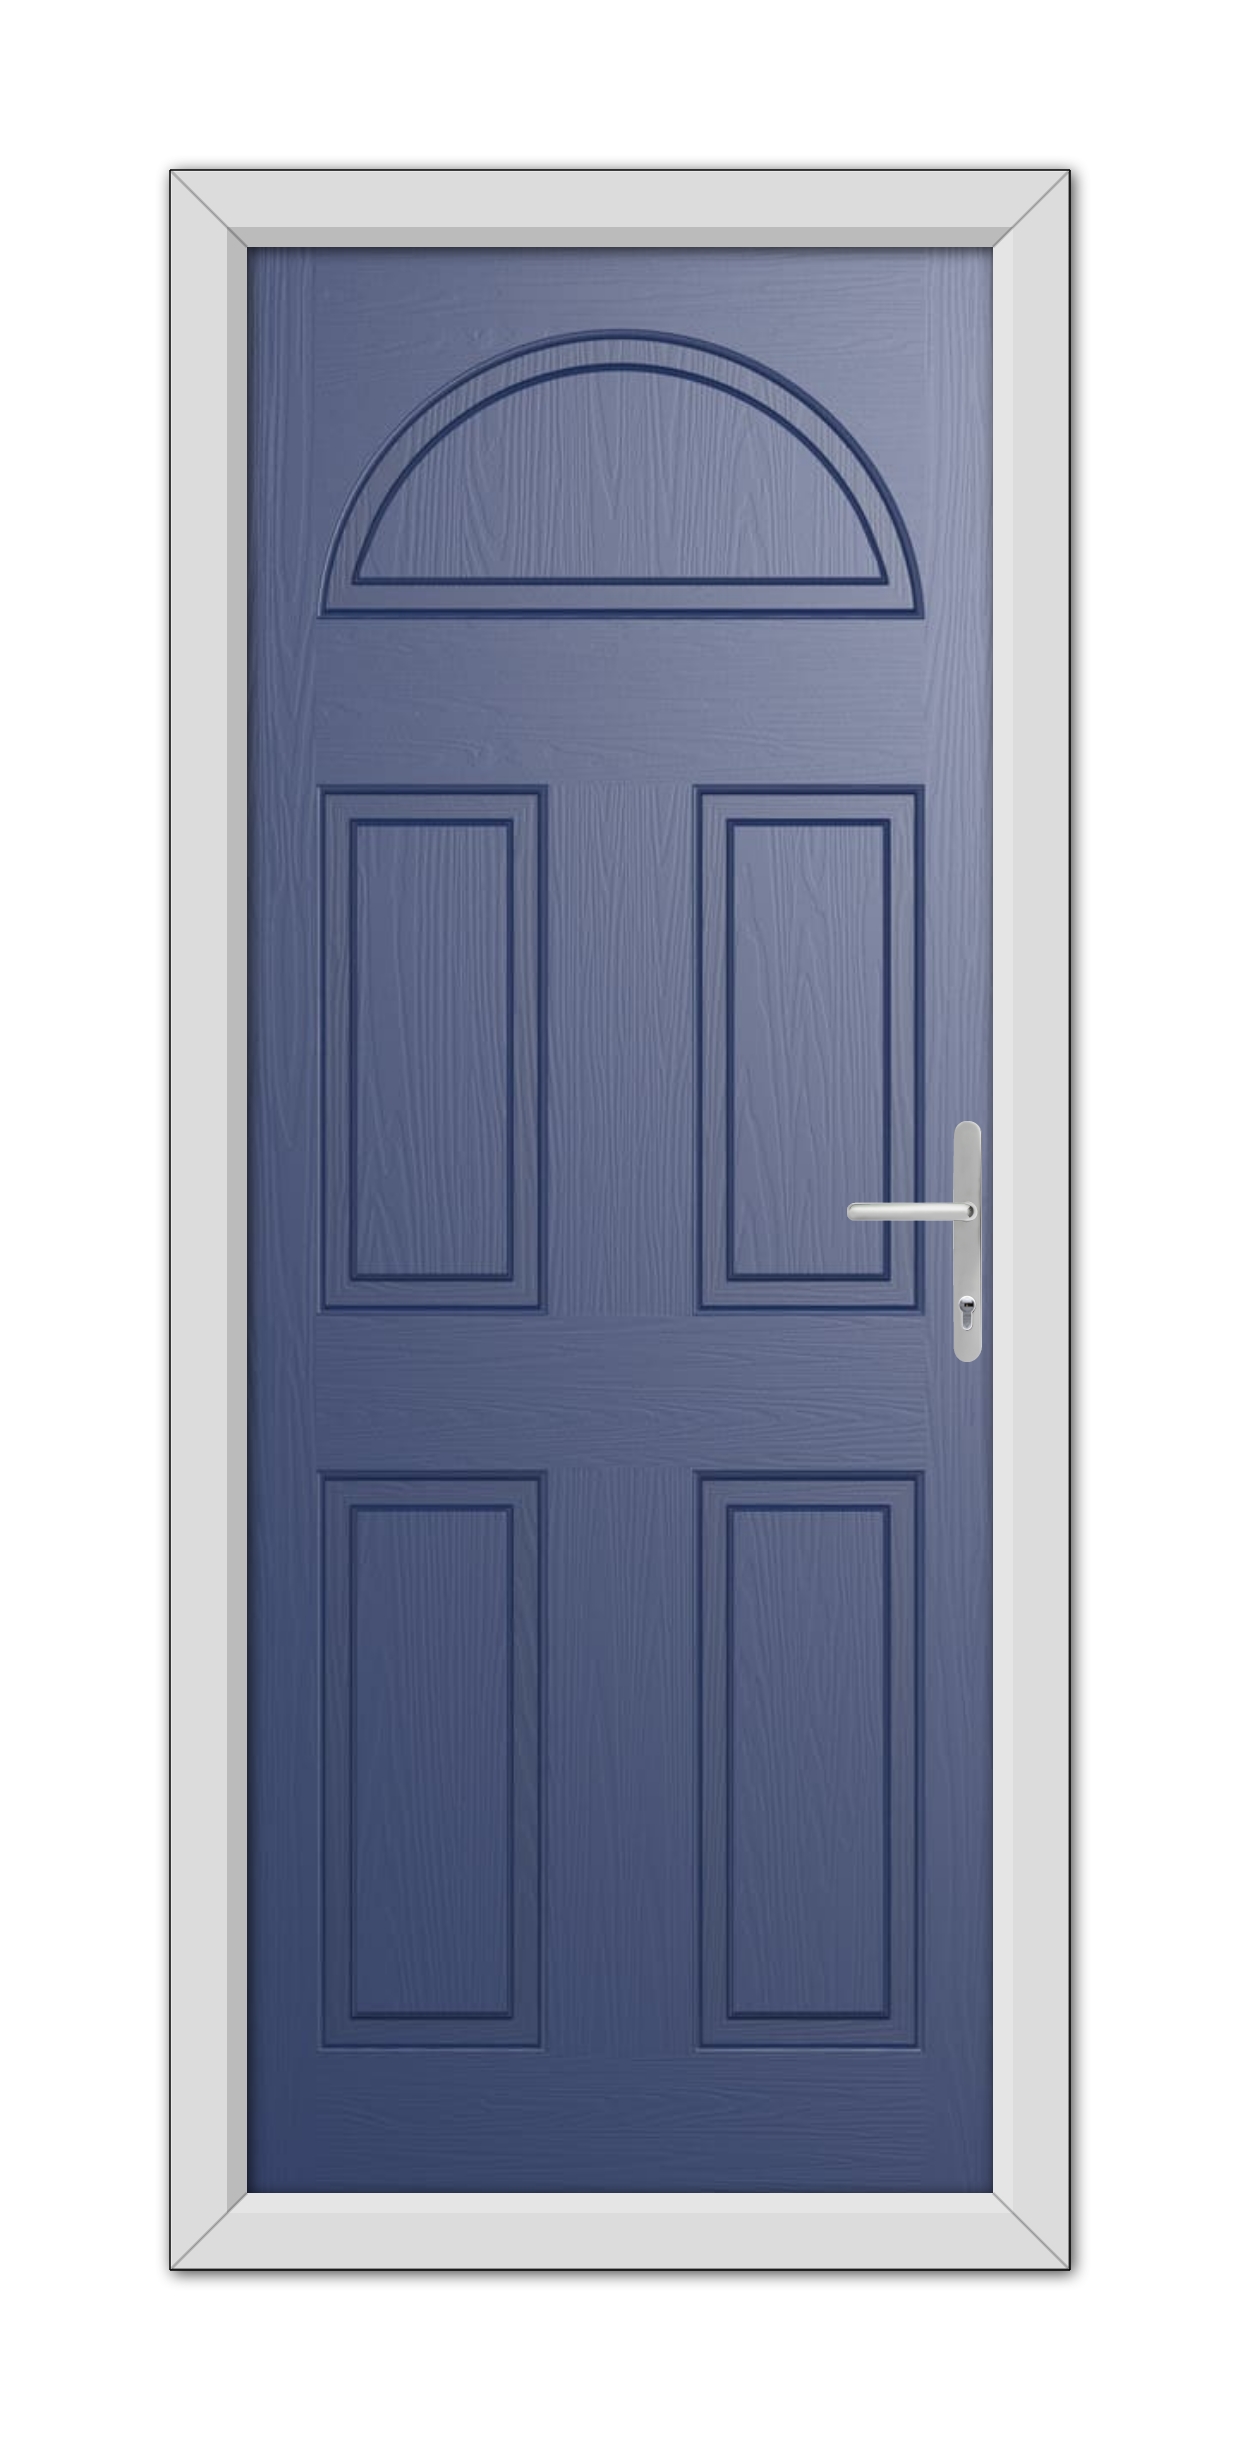 A Blue Winslow Solid Composite Door 48mm Timber Core with six panels and an arched window at the top, framed in white, featuring a modern handle on the left side.